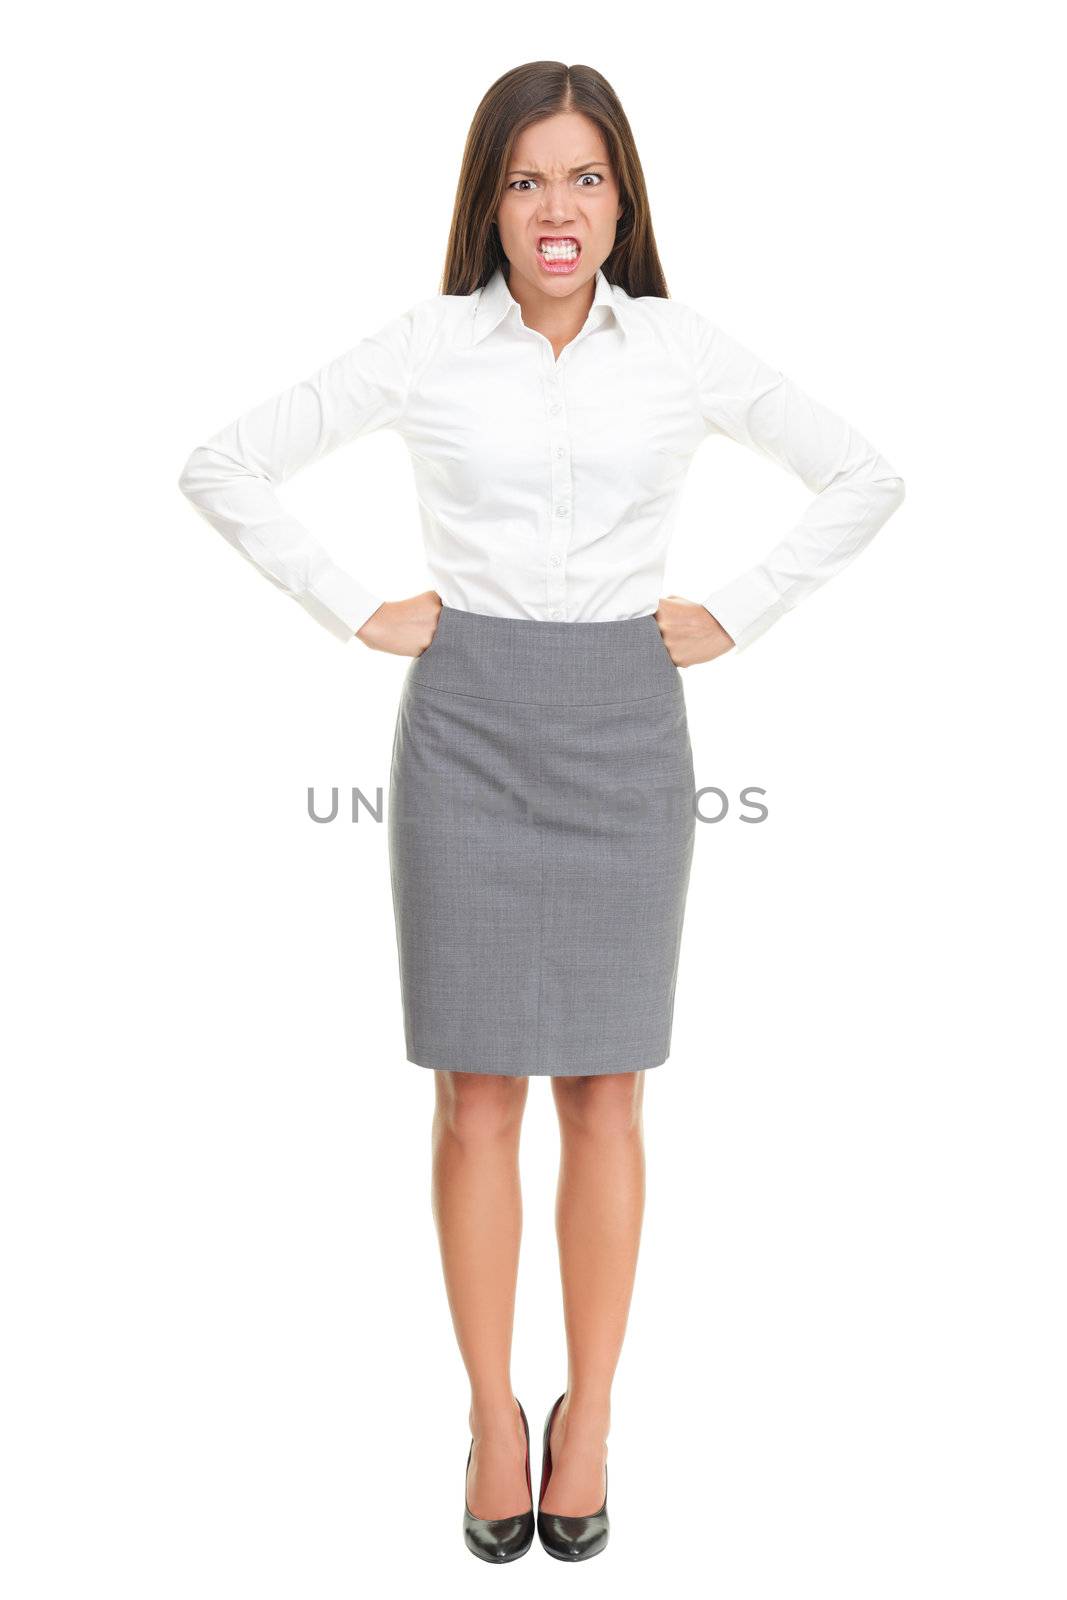 Angry upset young business woman standing isolated in full length. Funny image of mixed race Asian Caucasian female model.